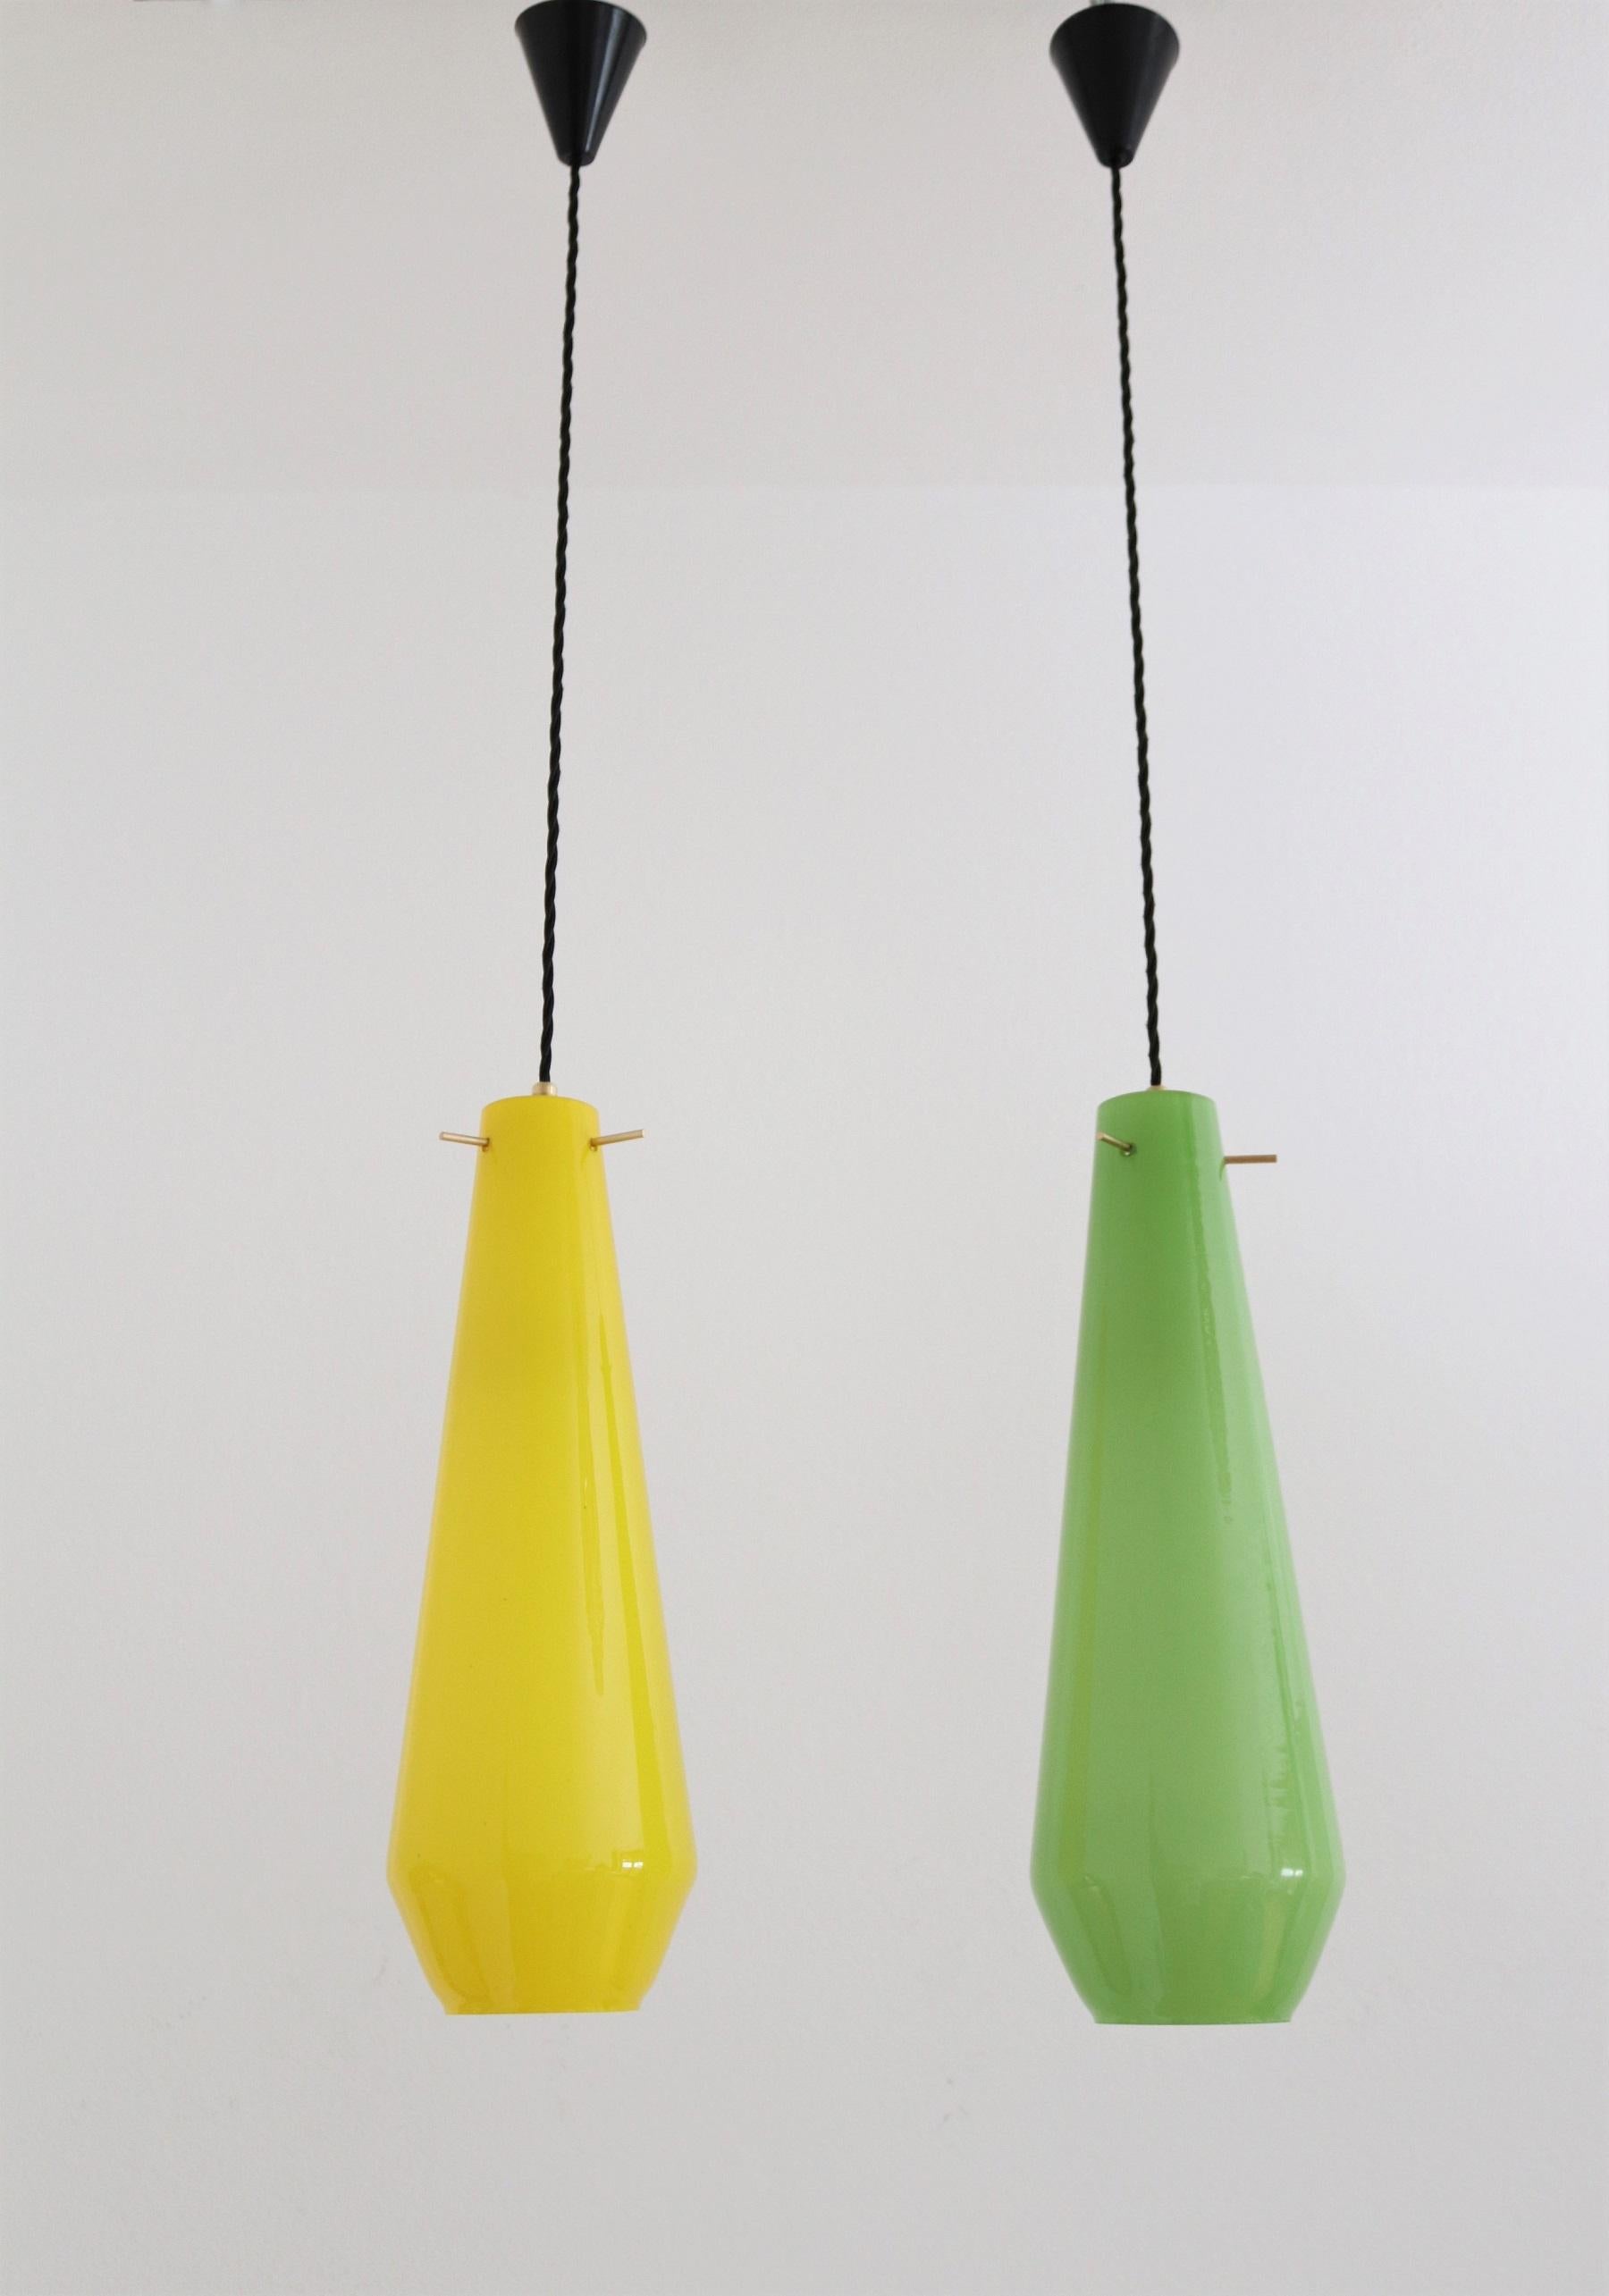 Beautiful pair of two glass pendant lights in different, shiny colors: green and yellow.
Made in Murano, Italy in the mid-century of the 1960s - 1970s.
Both lamps are in great shape and condition, and have minimal mouse bite chips around the holes,